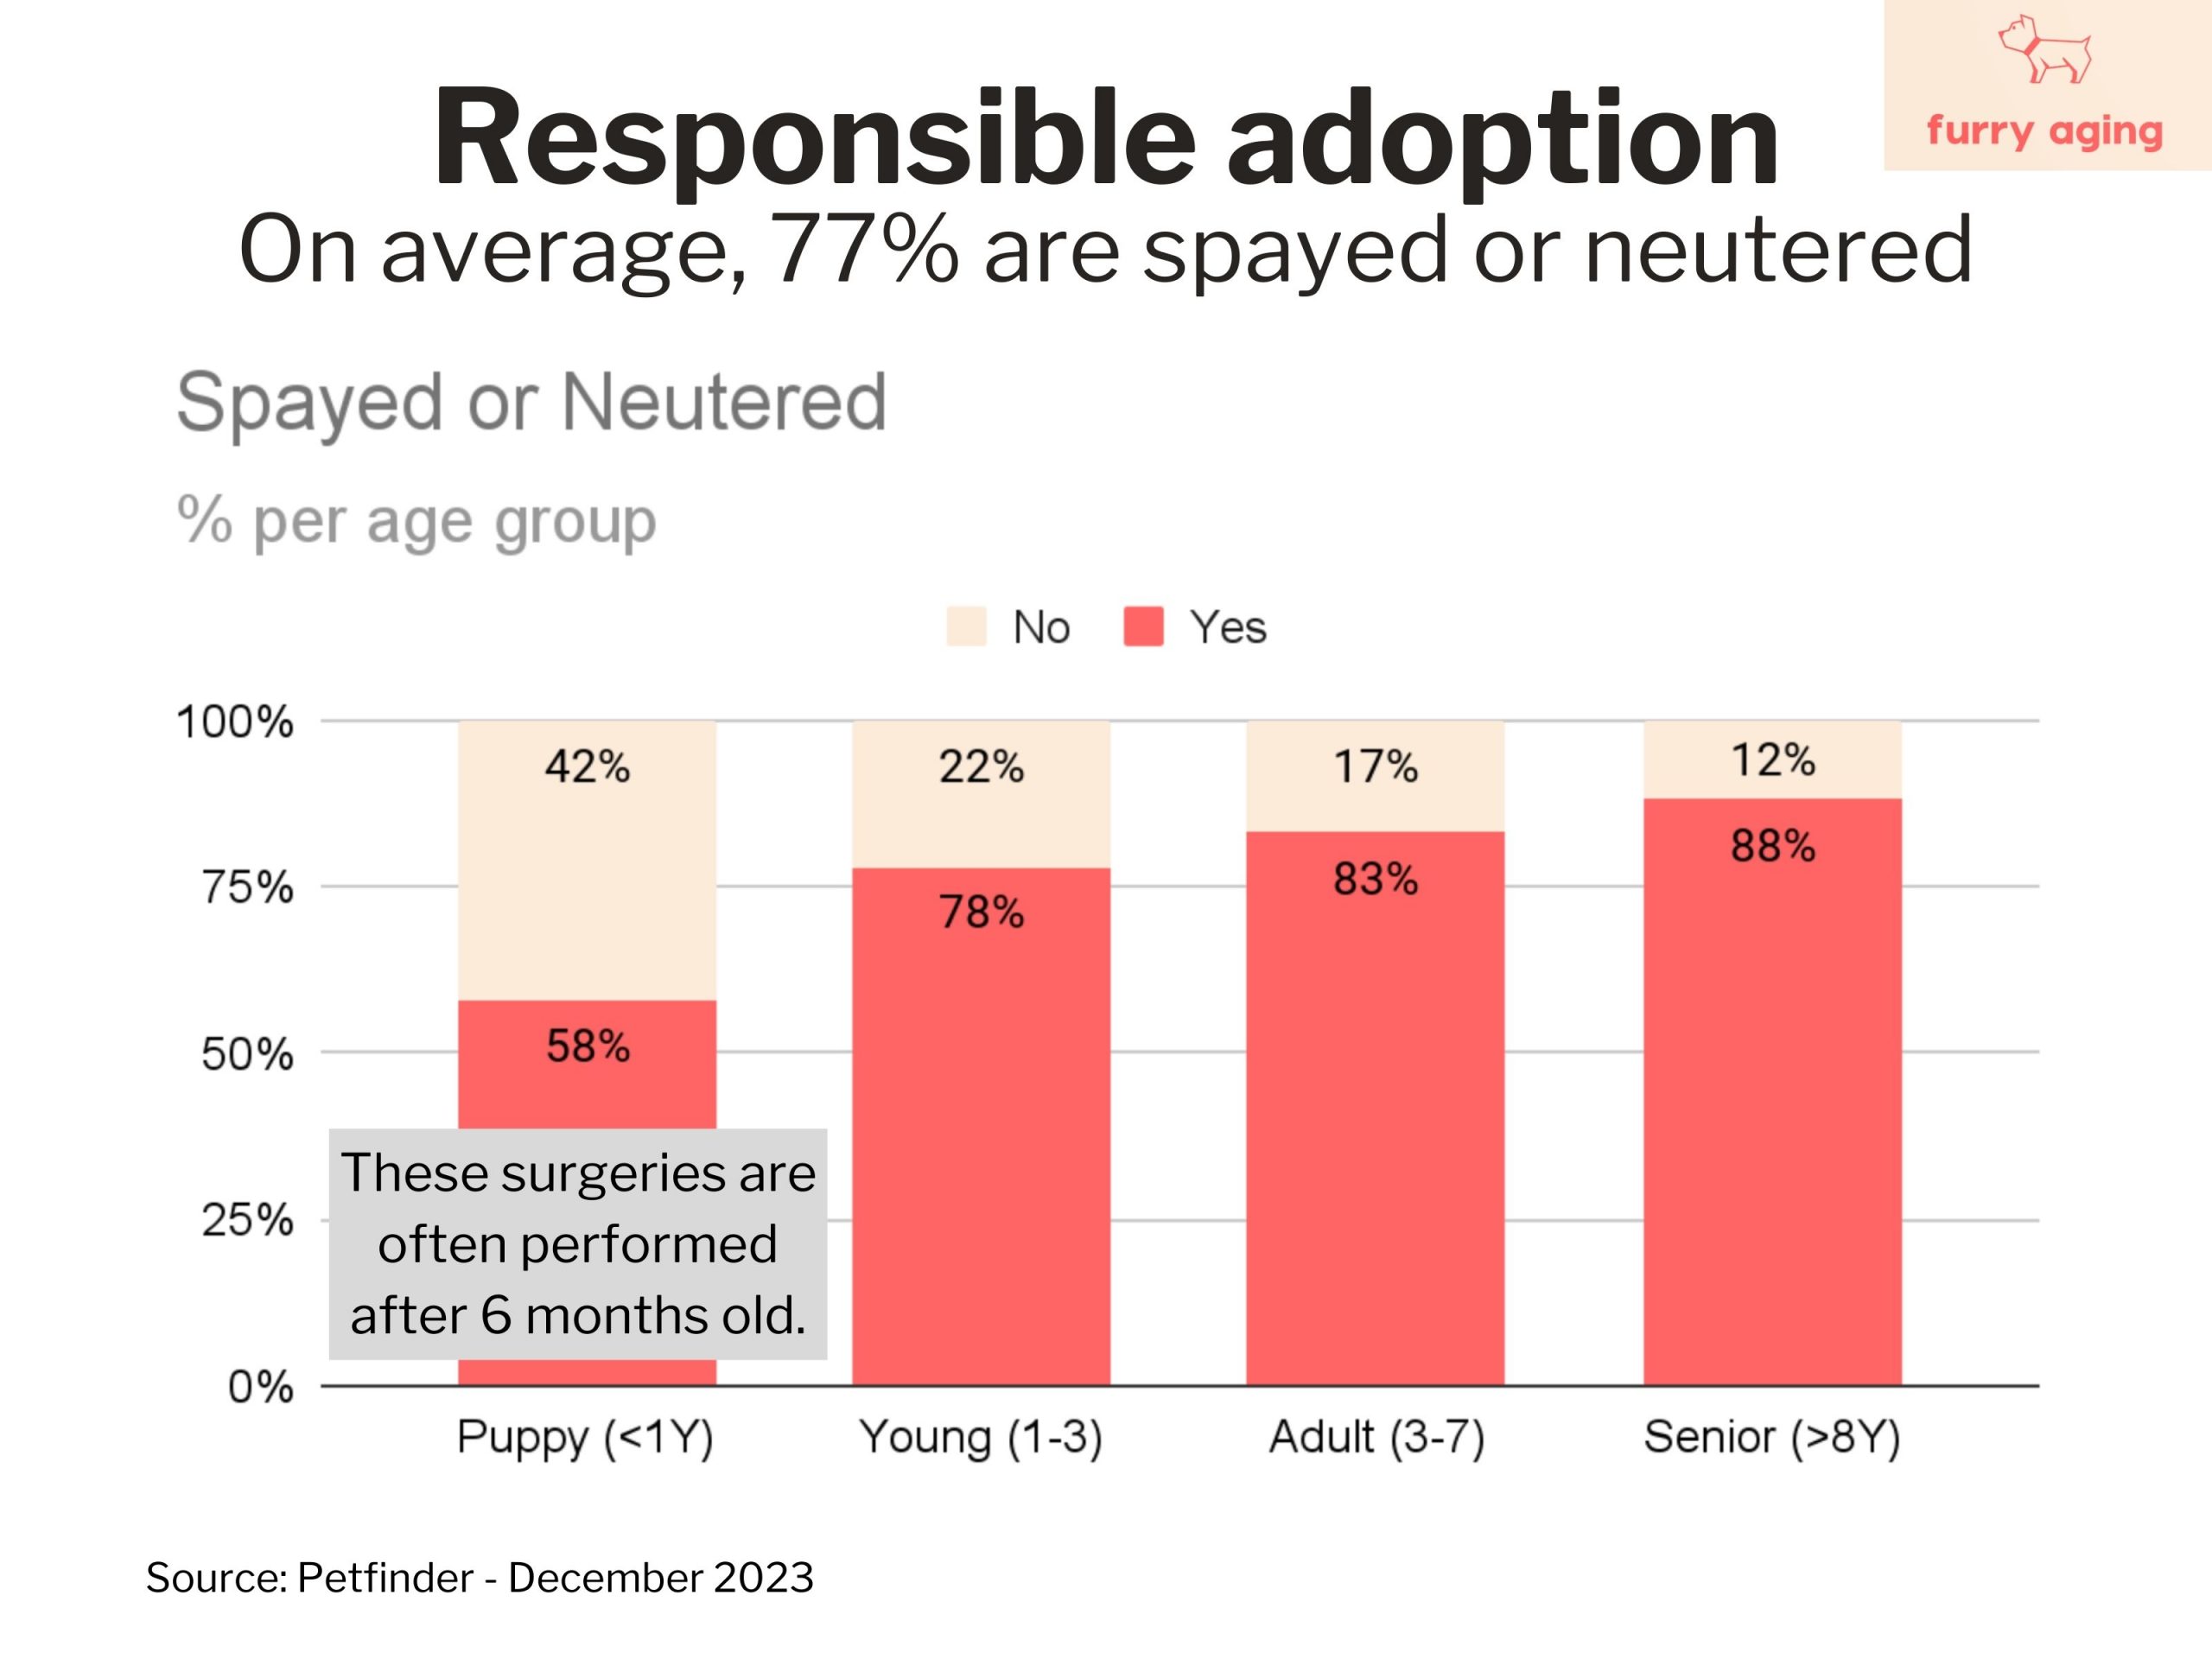 Percentage of dogs spayed and neutered